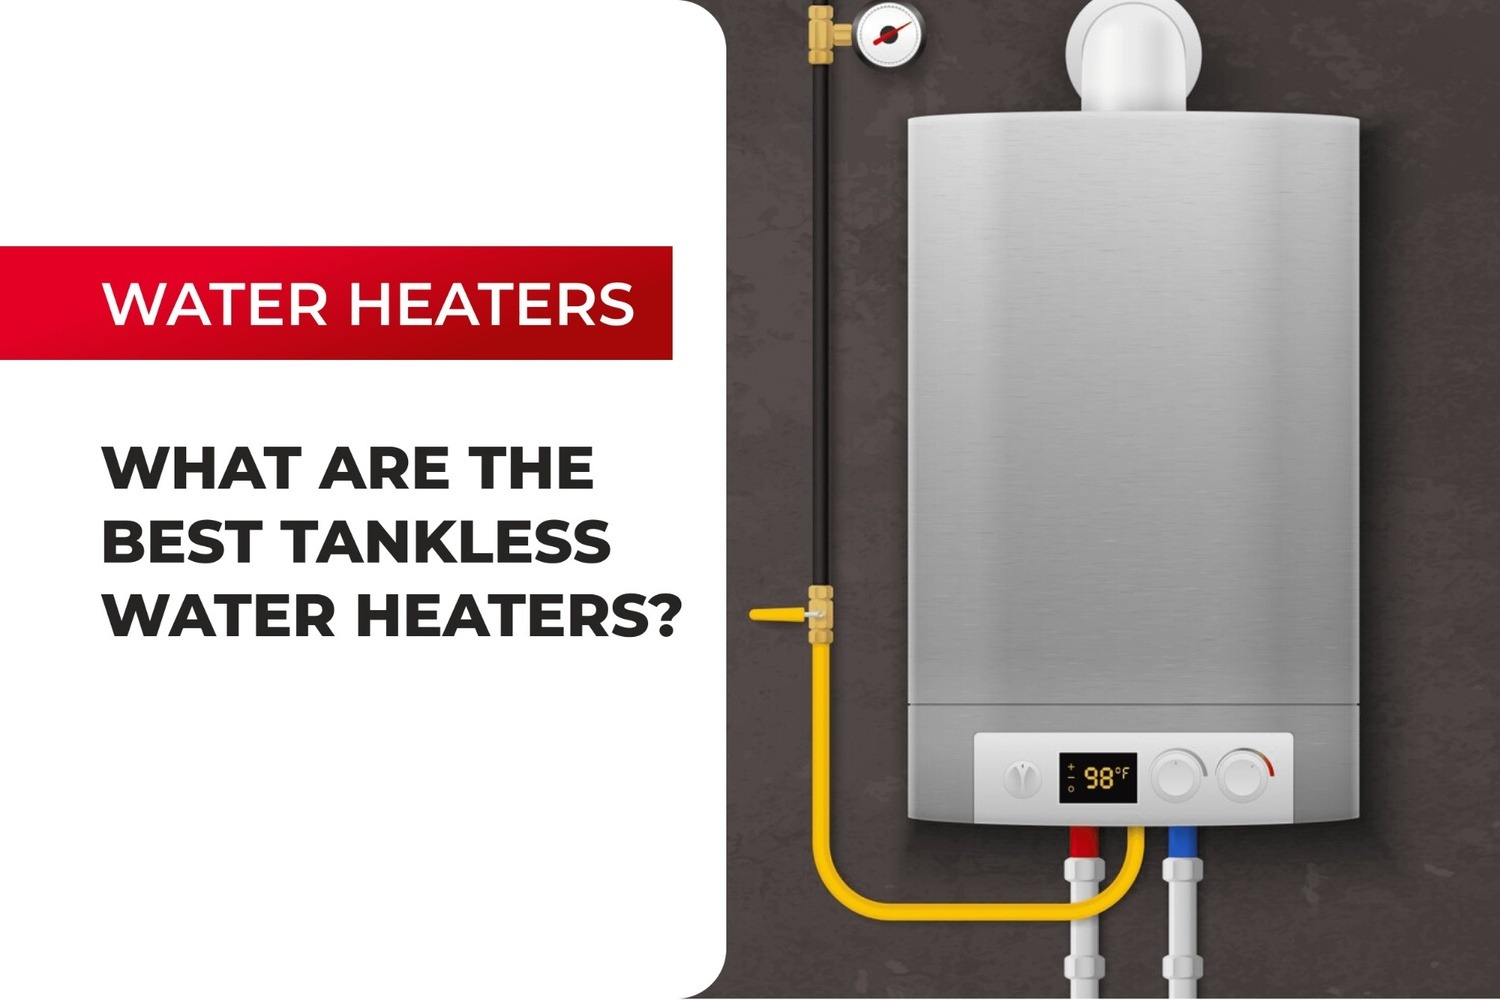 What Are The Best Tankless Water Heaters